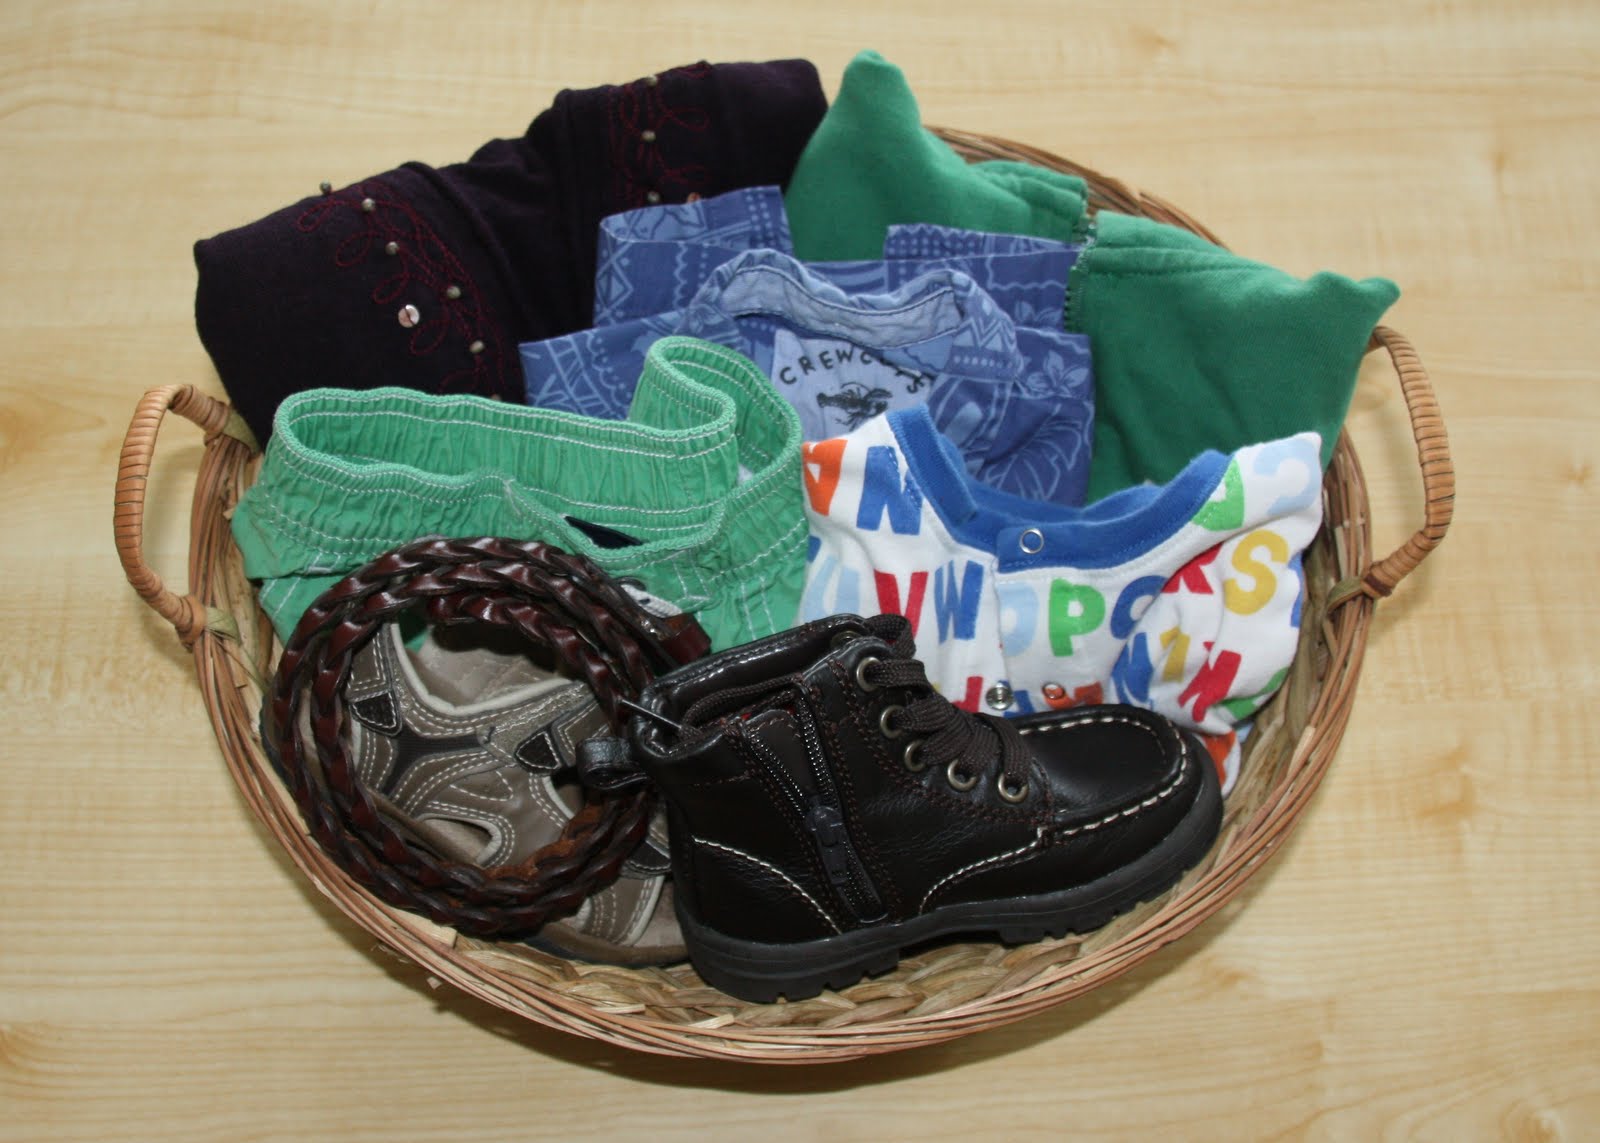 Dressing Basket (Photo from Counting Coconuts)